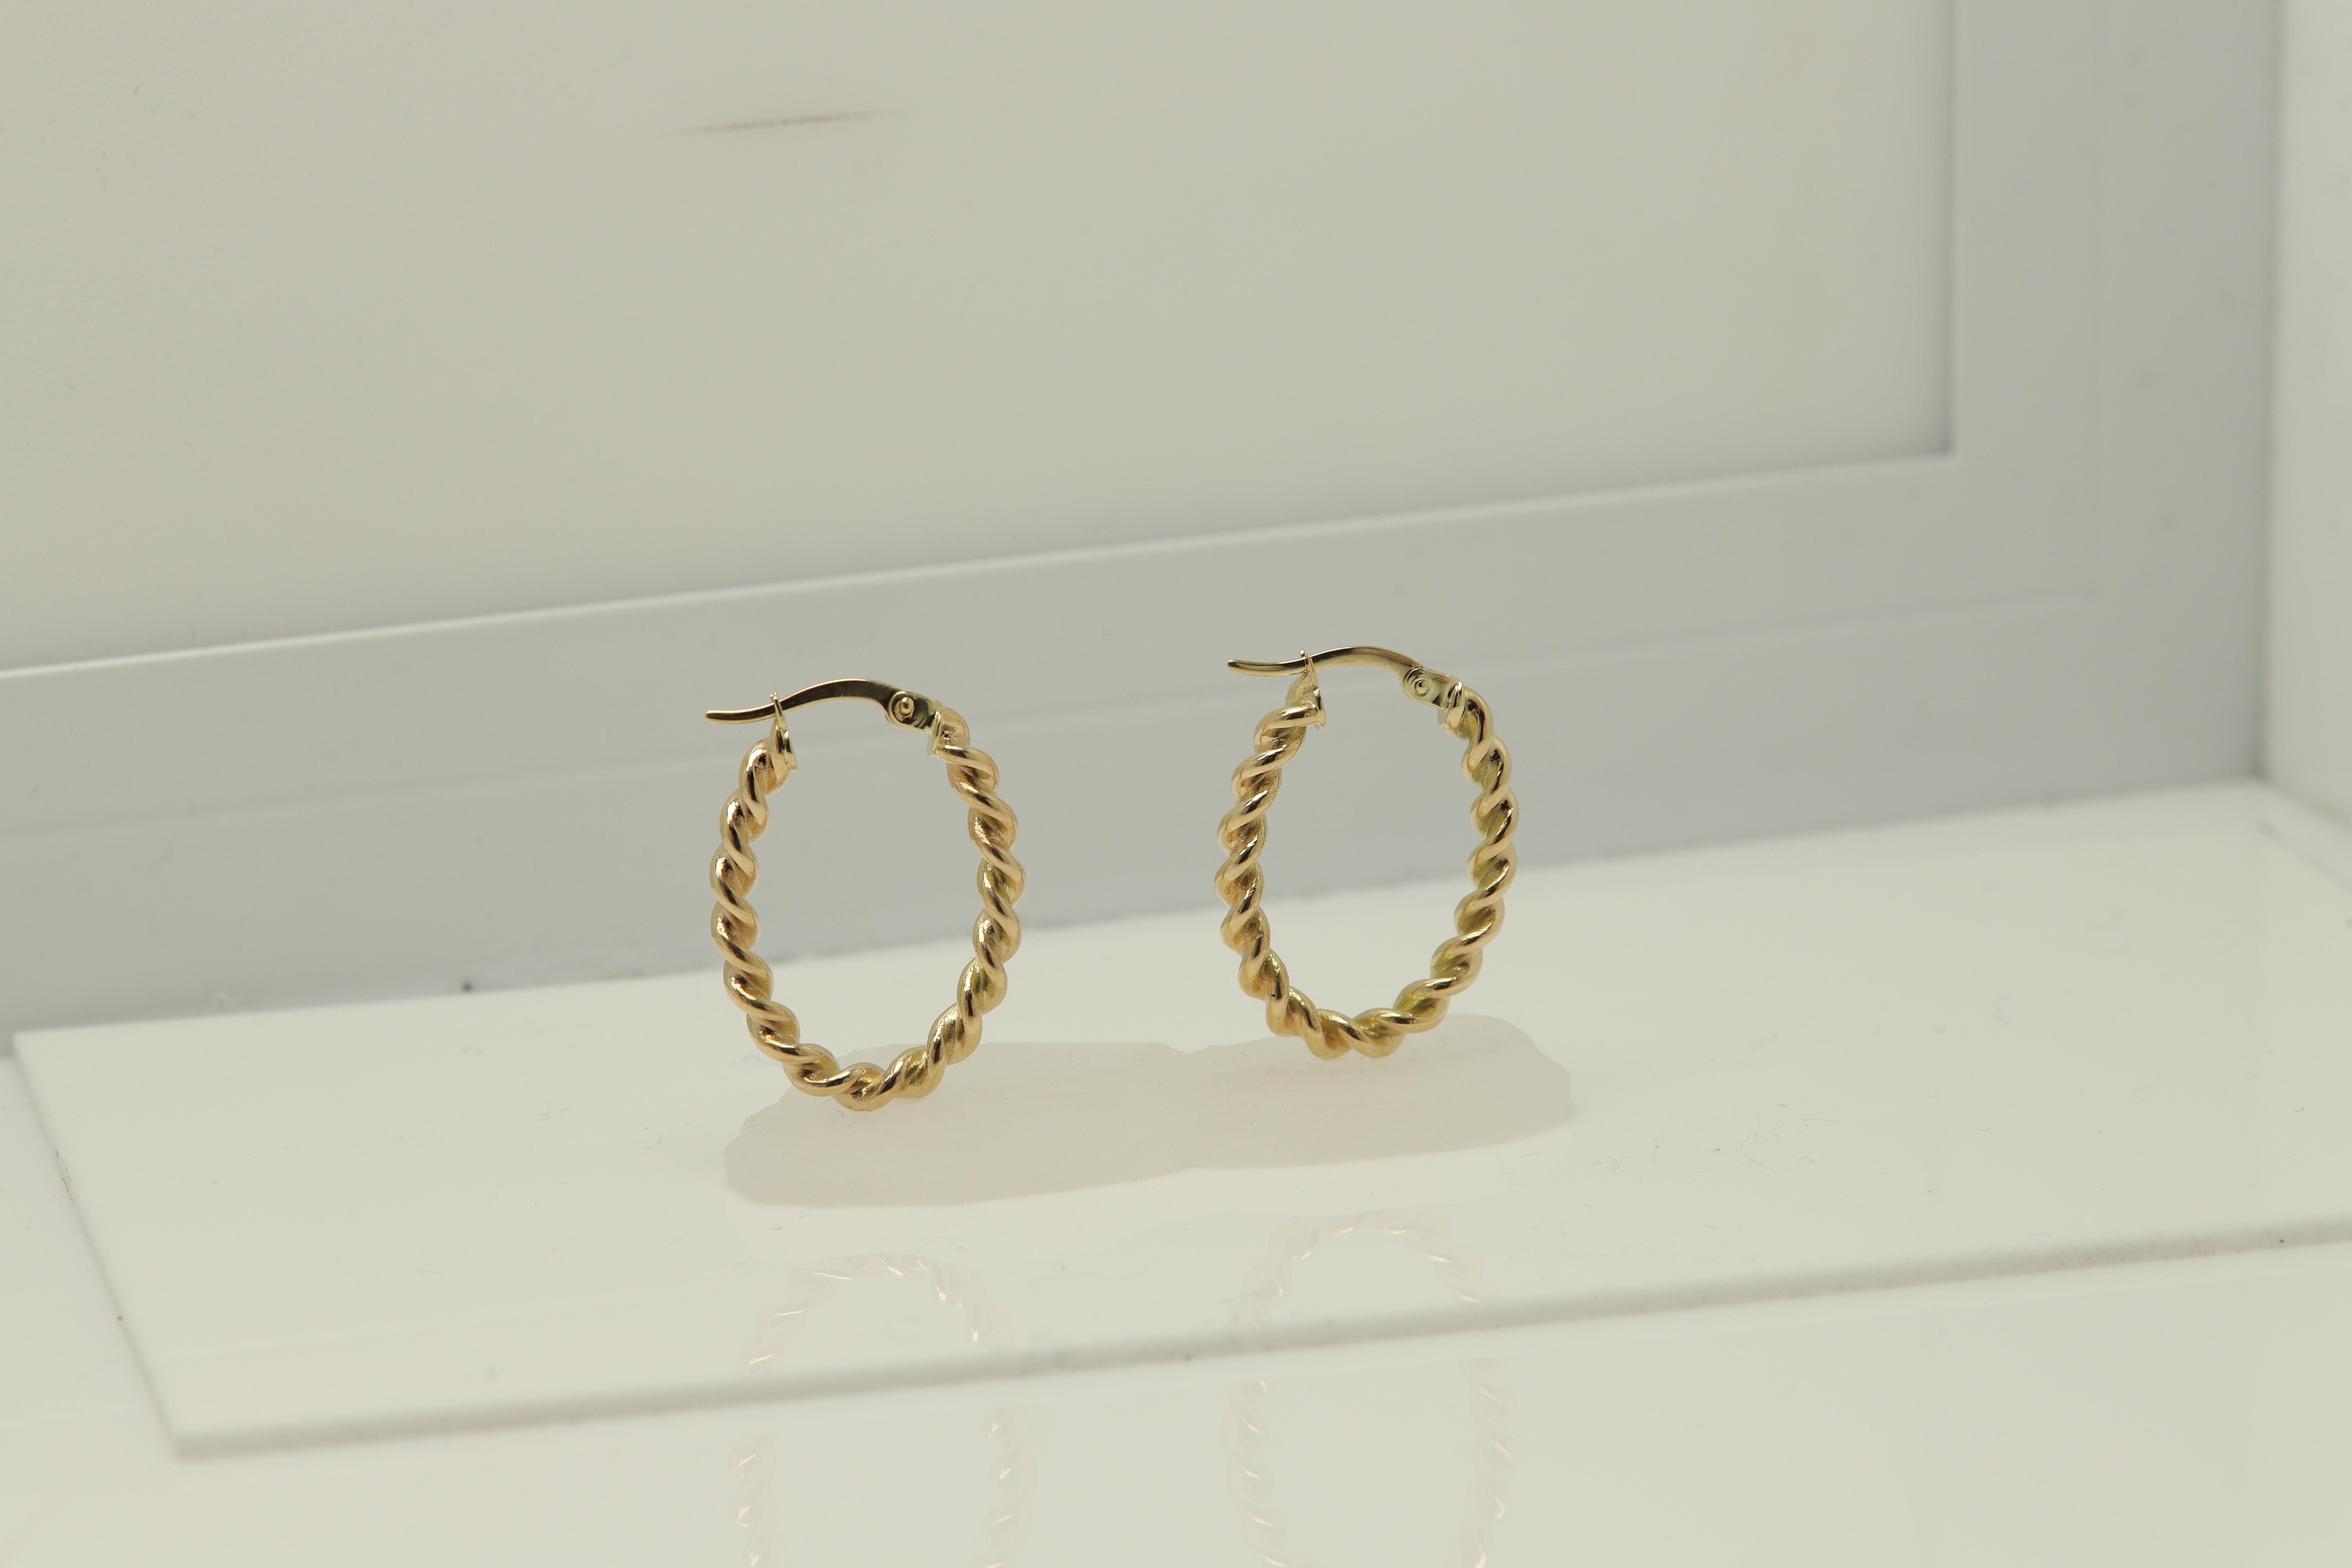 Made in Italy
Popular trendy Gold Hoops - oval shape
Fancy Swirl design - modern look.
weight is 2.0 grams total.
14k Yellow Gold.
approx size: 1' Inch long x 6/'8 inch (25 mm x 18 mm) 
Standard Latch Back.
+Gift Box
(#2.0gr)